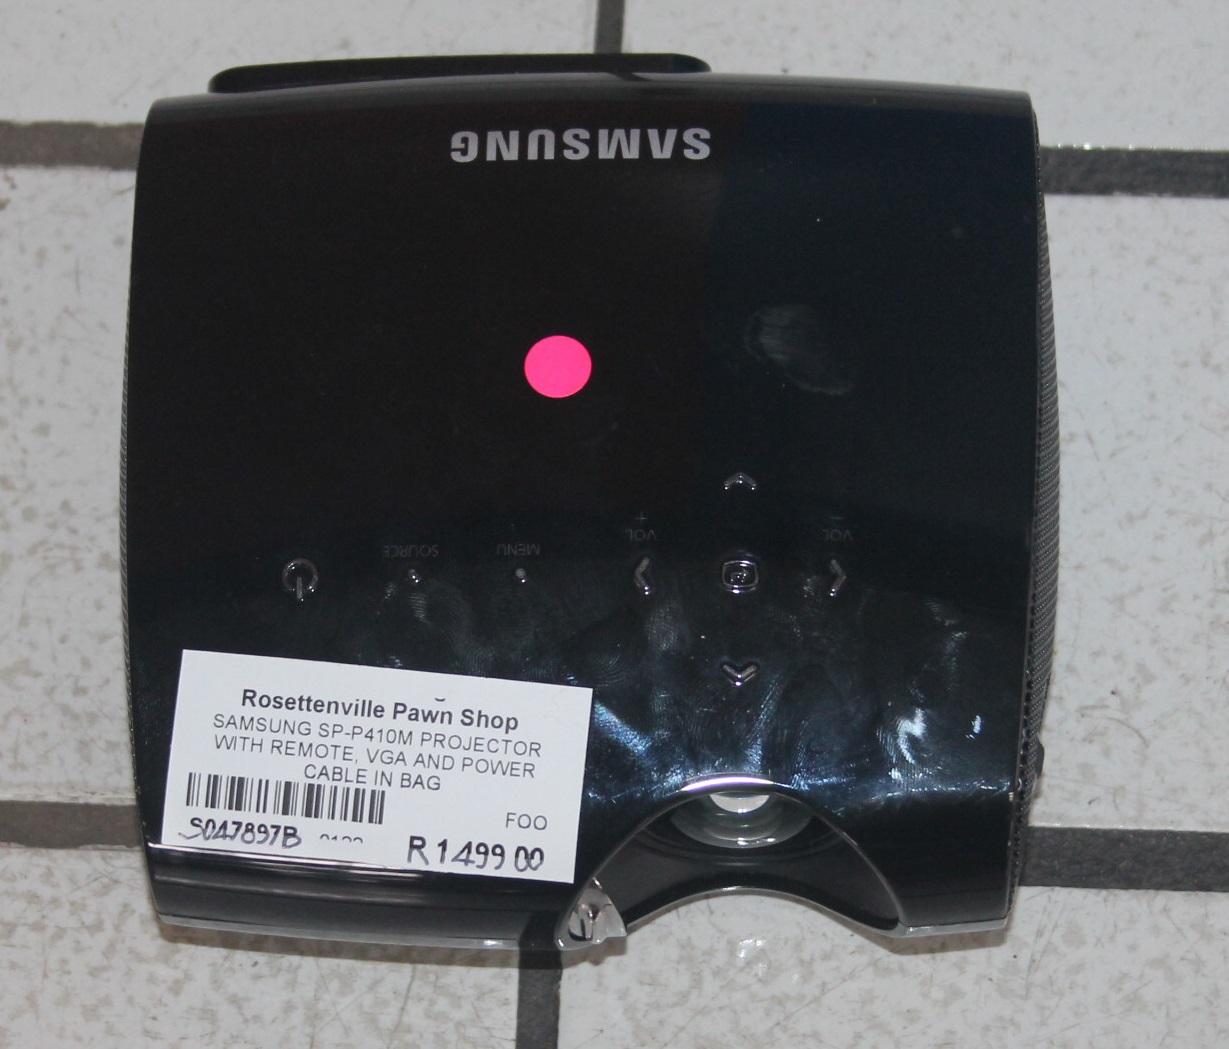 Samsung projector with remote and cables in bag S047897B #Rosettenvillepawnshop